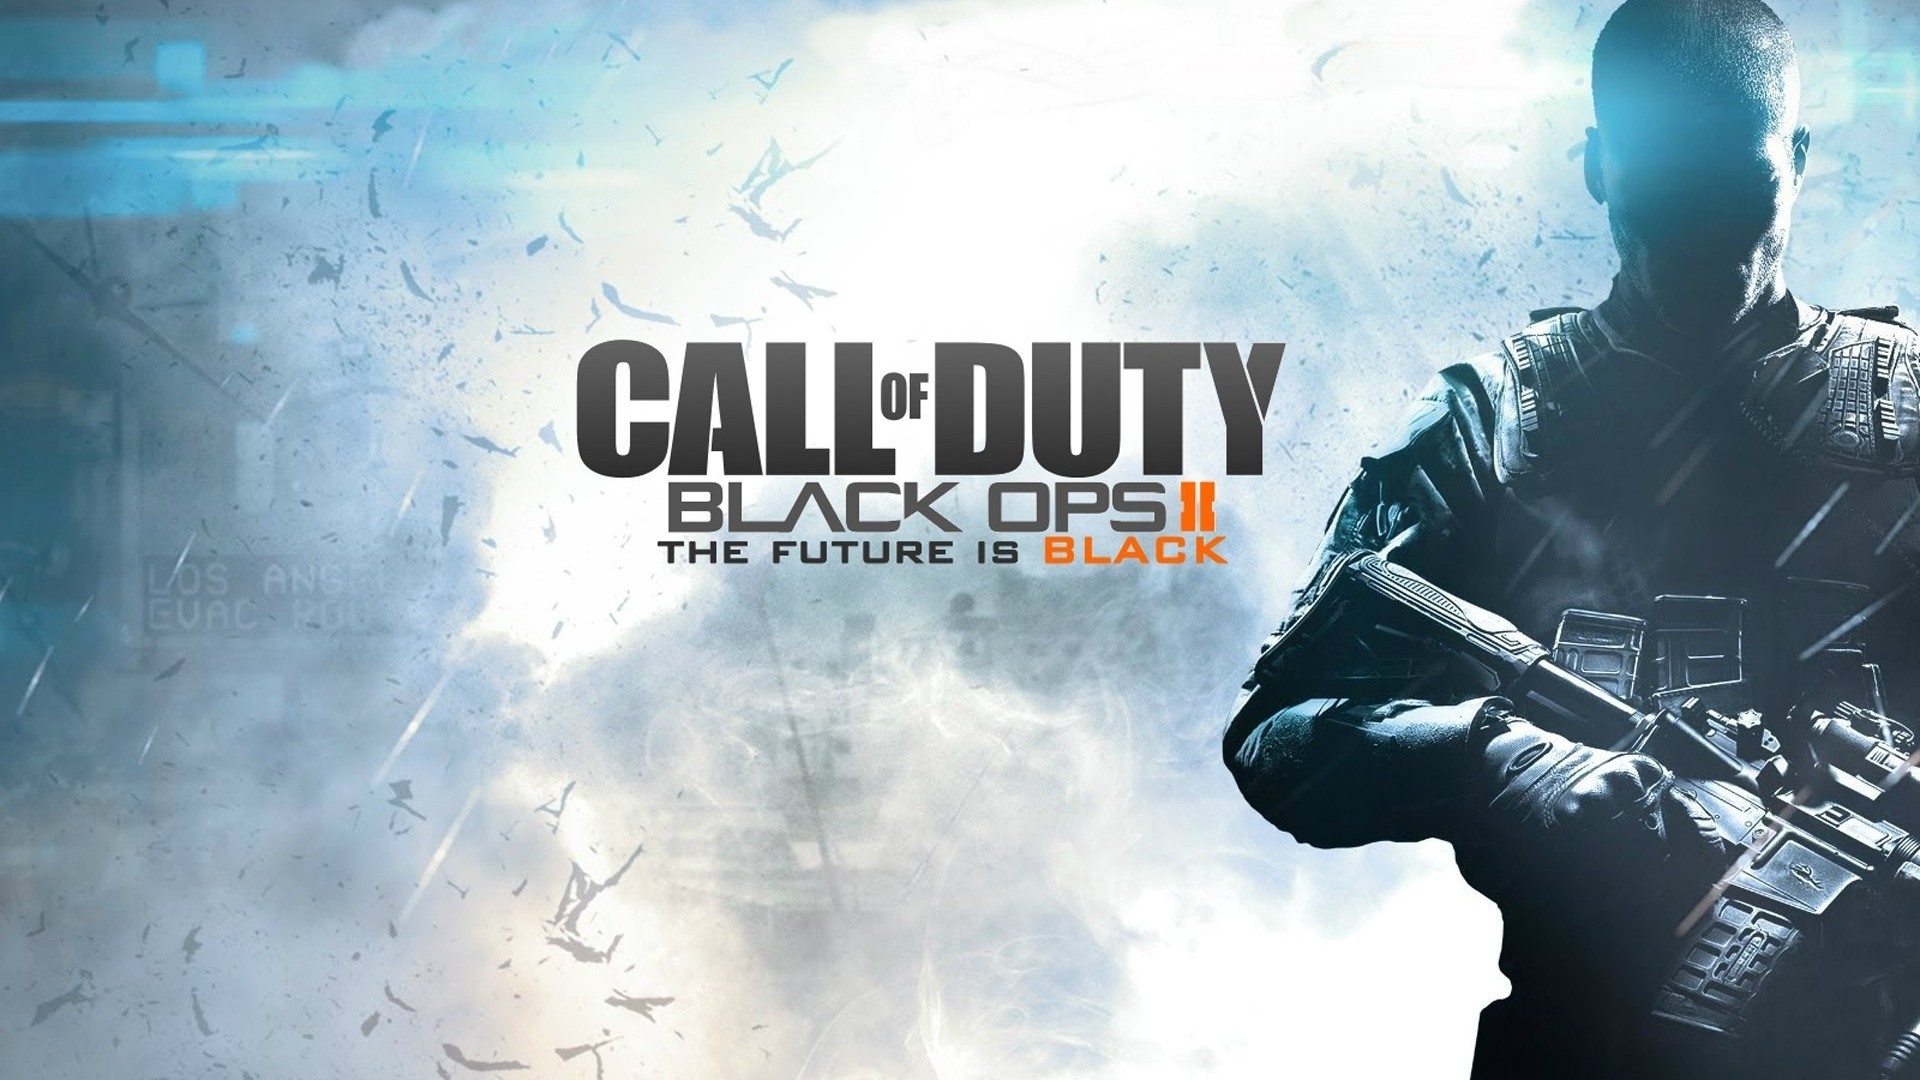 Call of Duty Black Ops 2 Future Black for 1920 x 1080 HDTV 1080p resolution